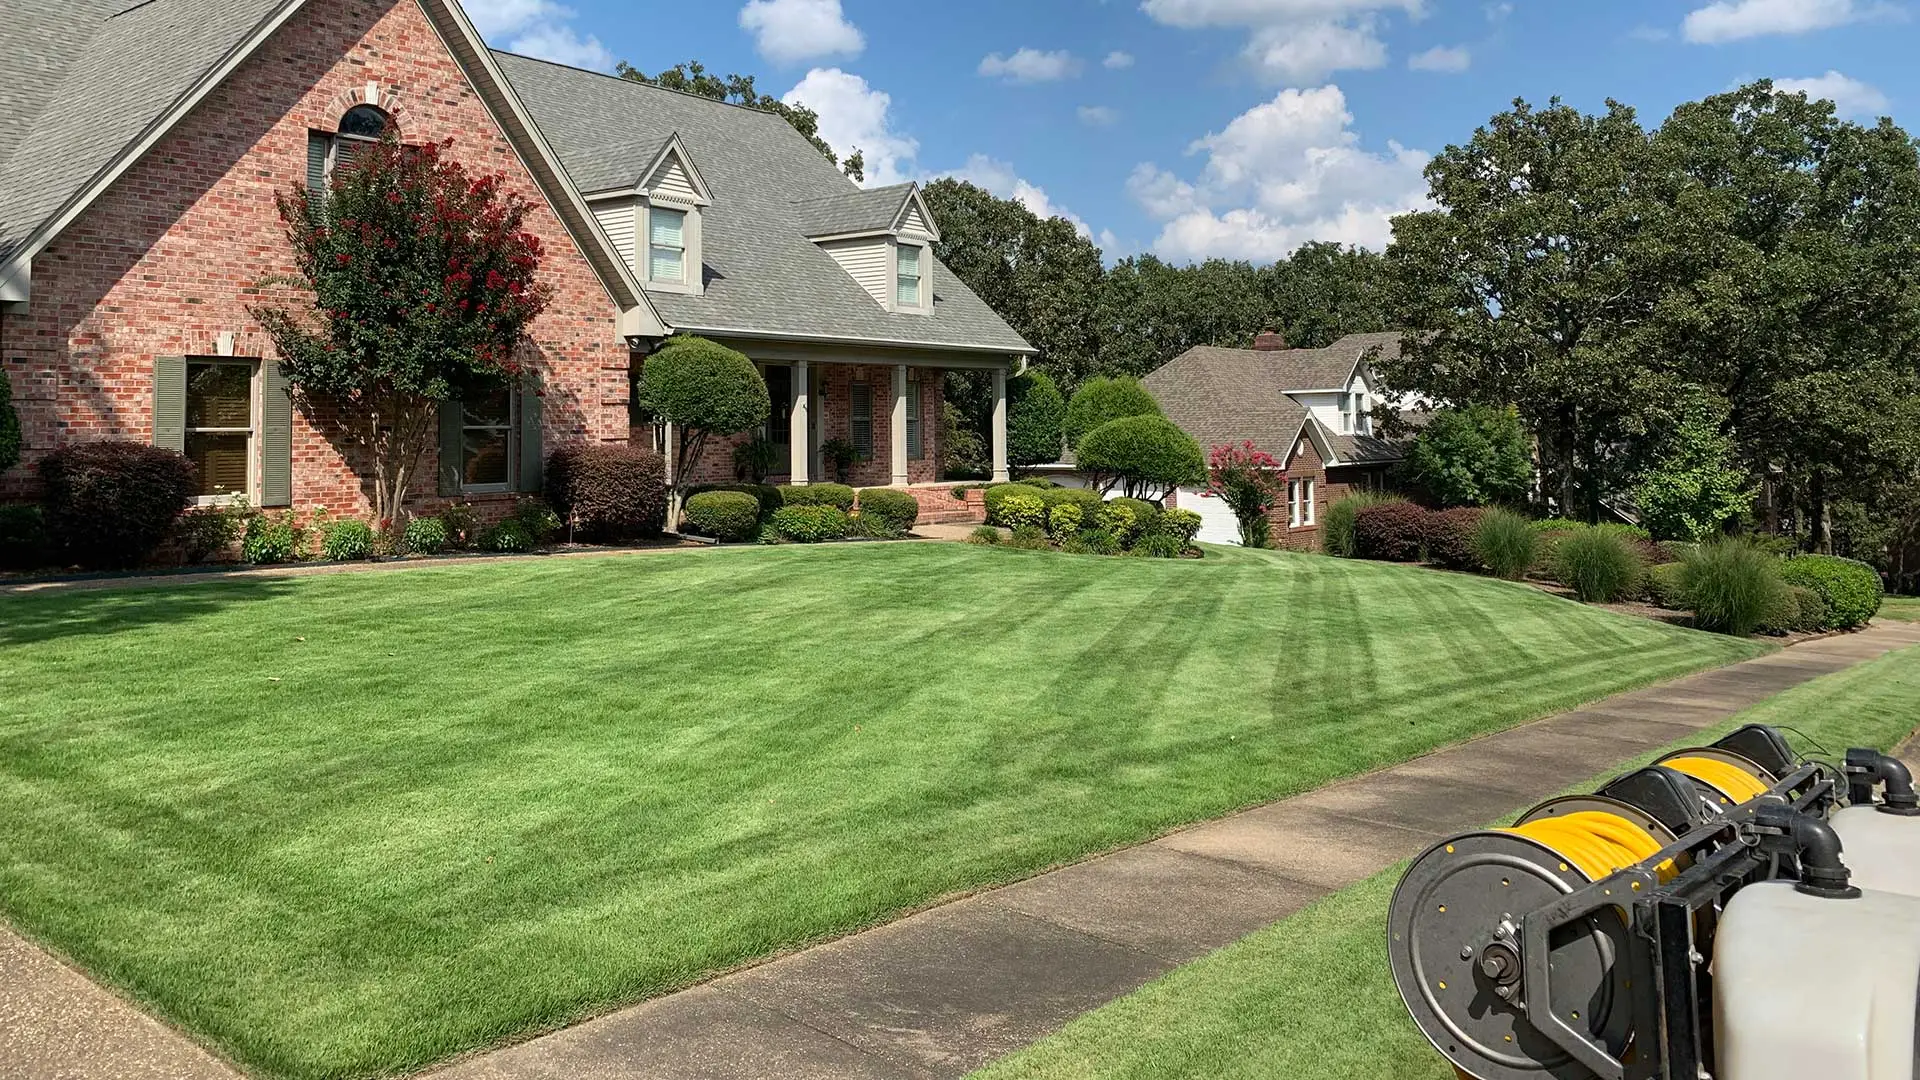 Well fertilized home lawn and red brick house in North Little Rock, AR.